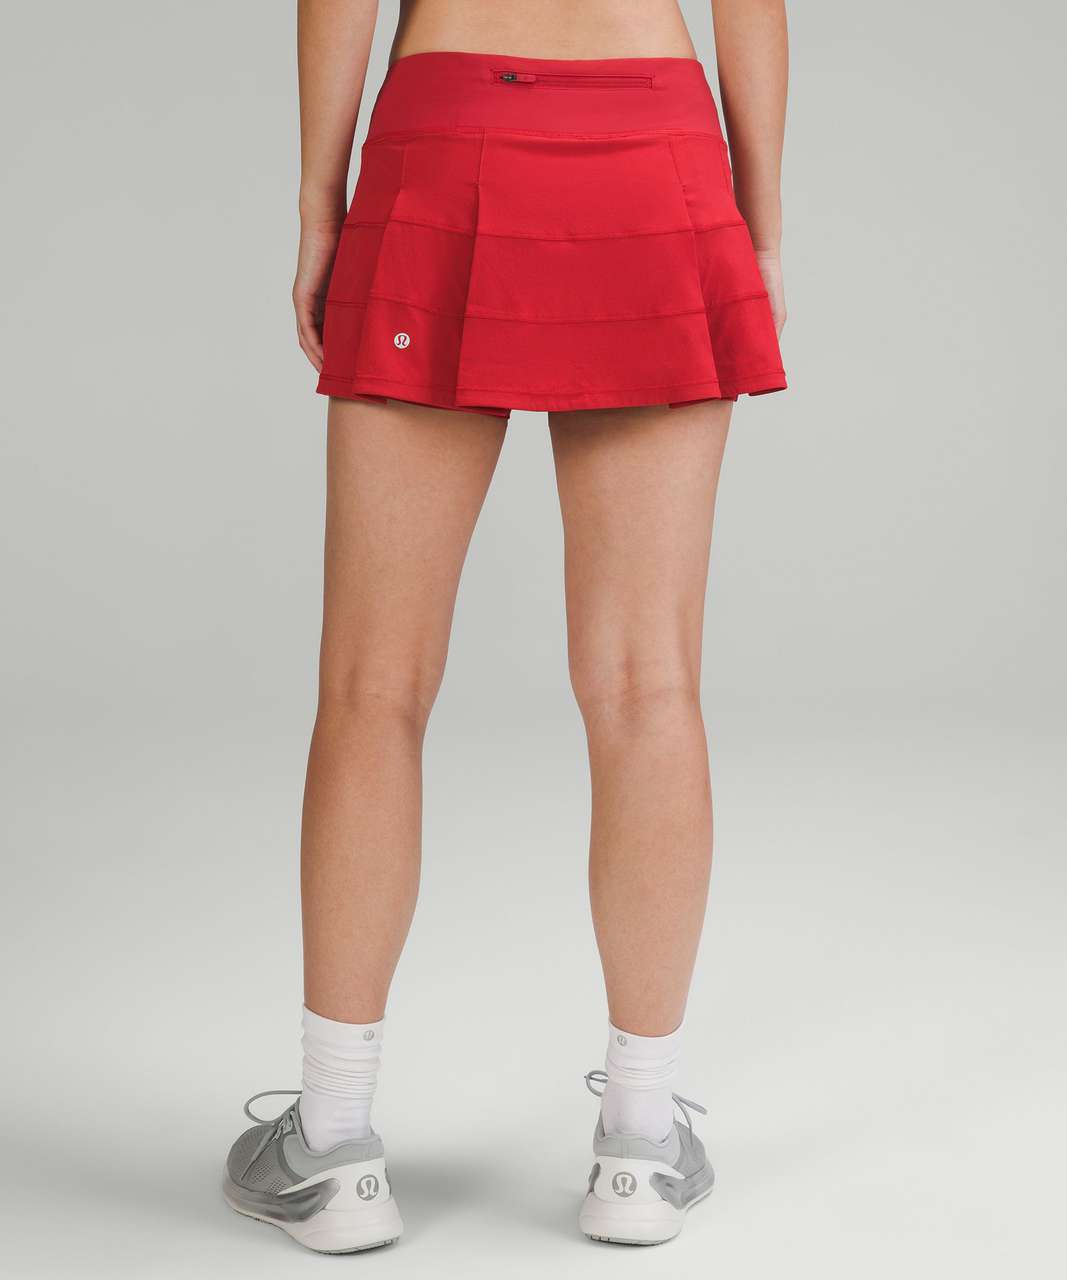 Lululemon Pace Rival Mid-Rise Skirt - Persian Red